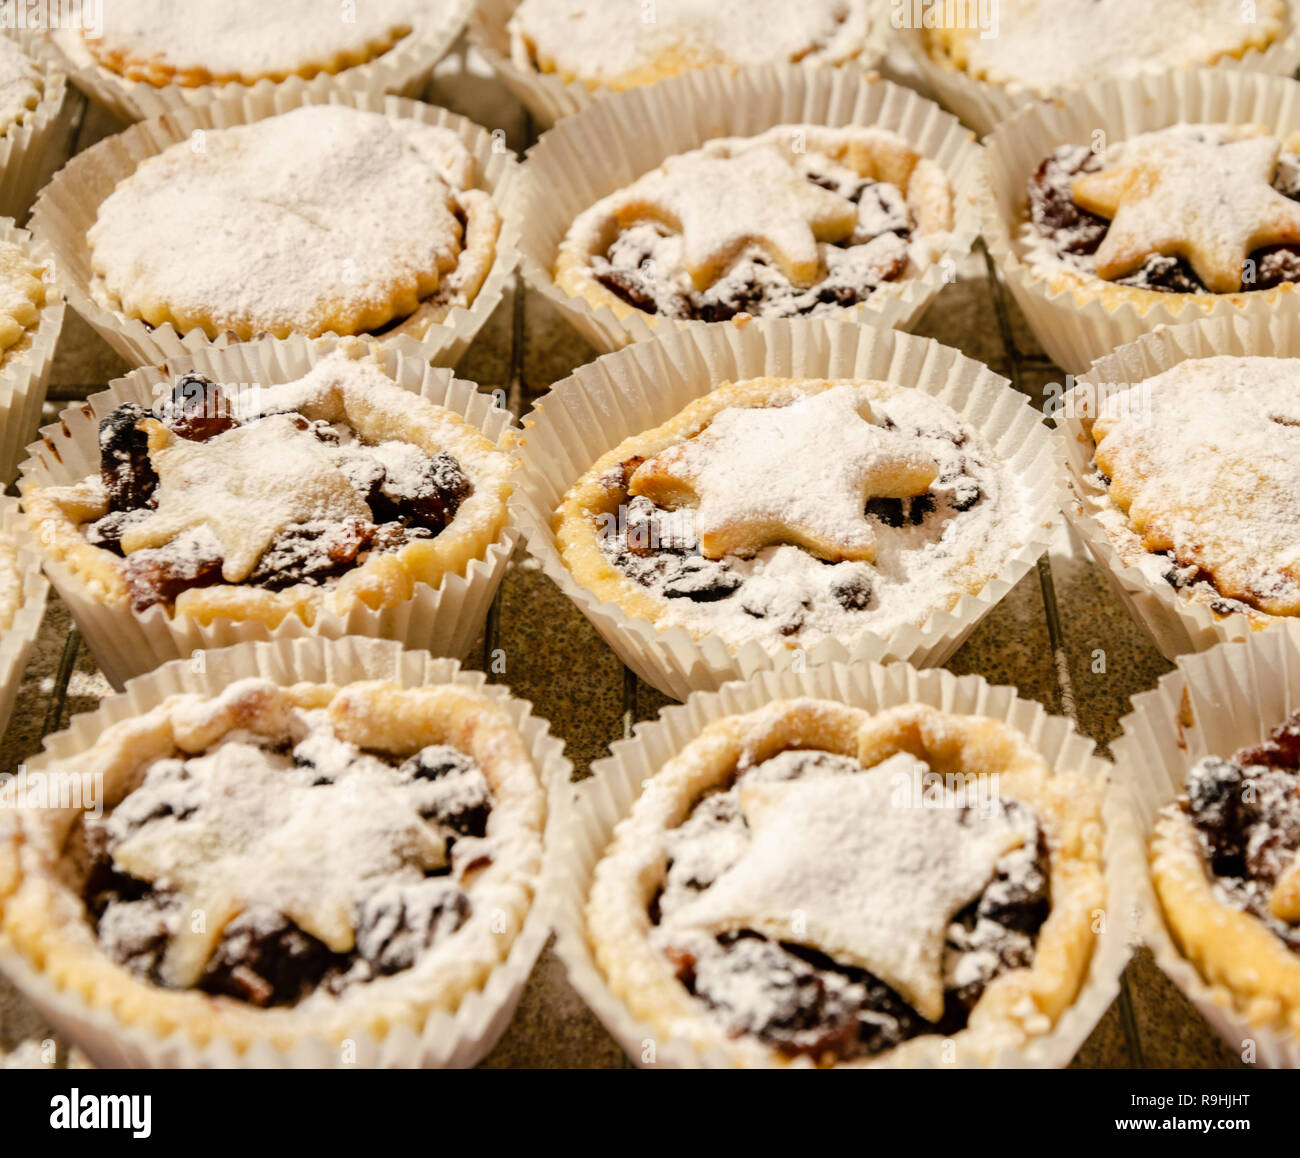 Homemade mince pies are a festive Christmas snack or dessert. Stock Photo